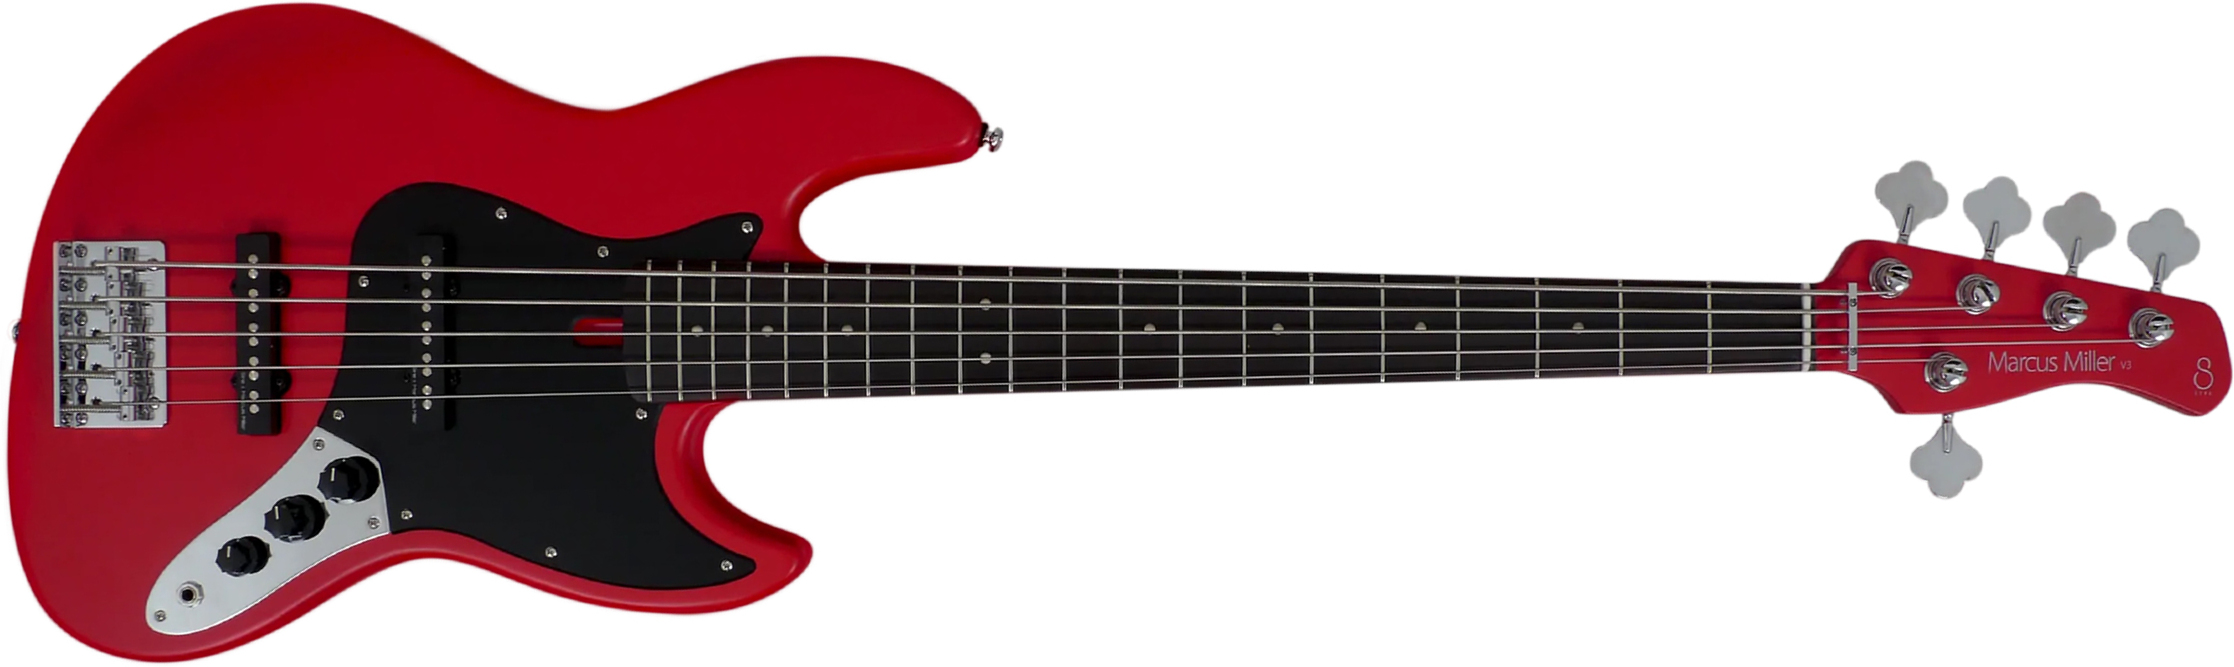 Marcus Miller V3p 5st 5c Rw - Red Satin - Solid body elektrische bas - Main picture